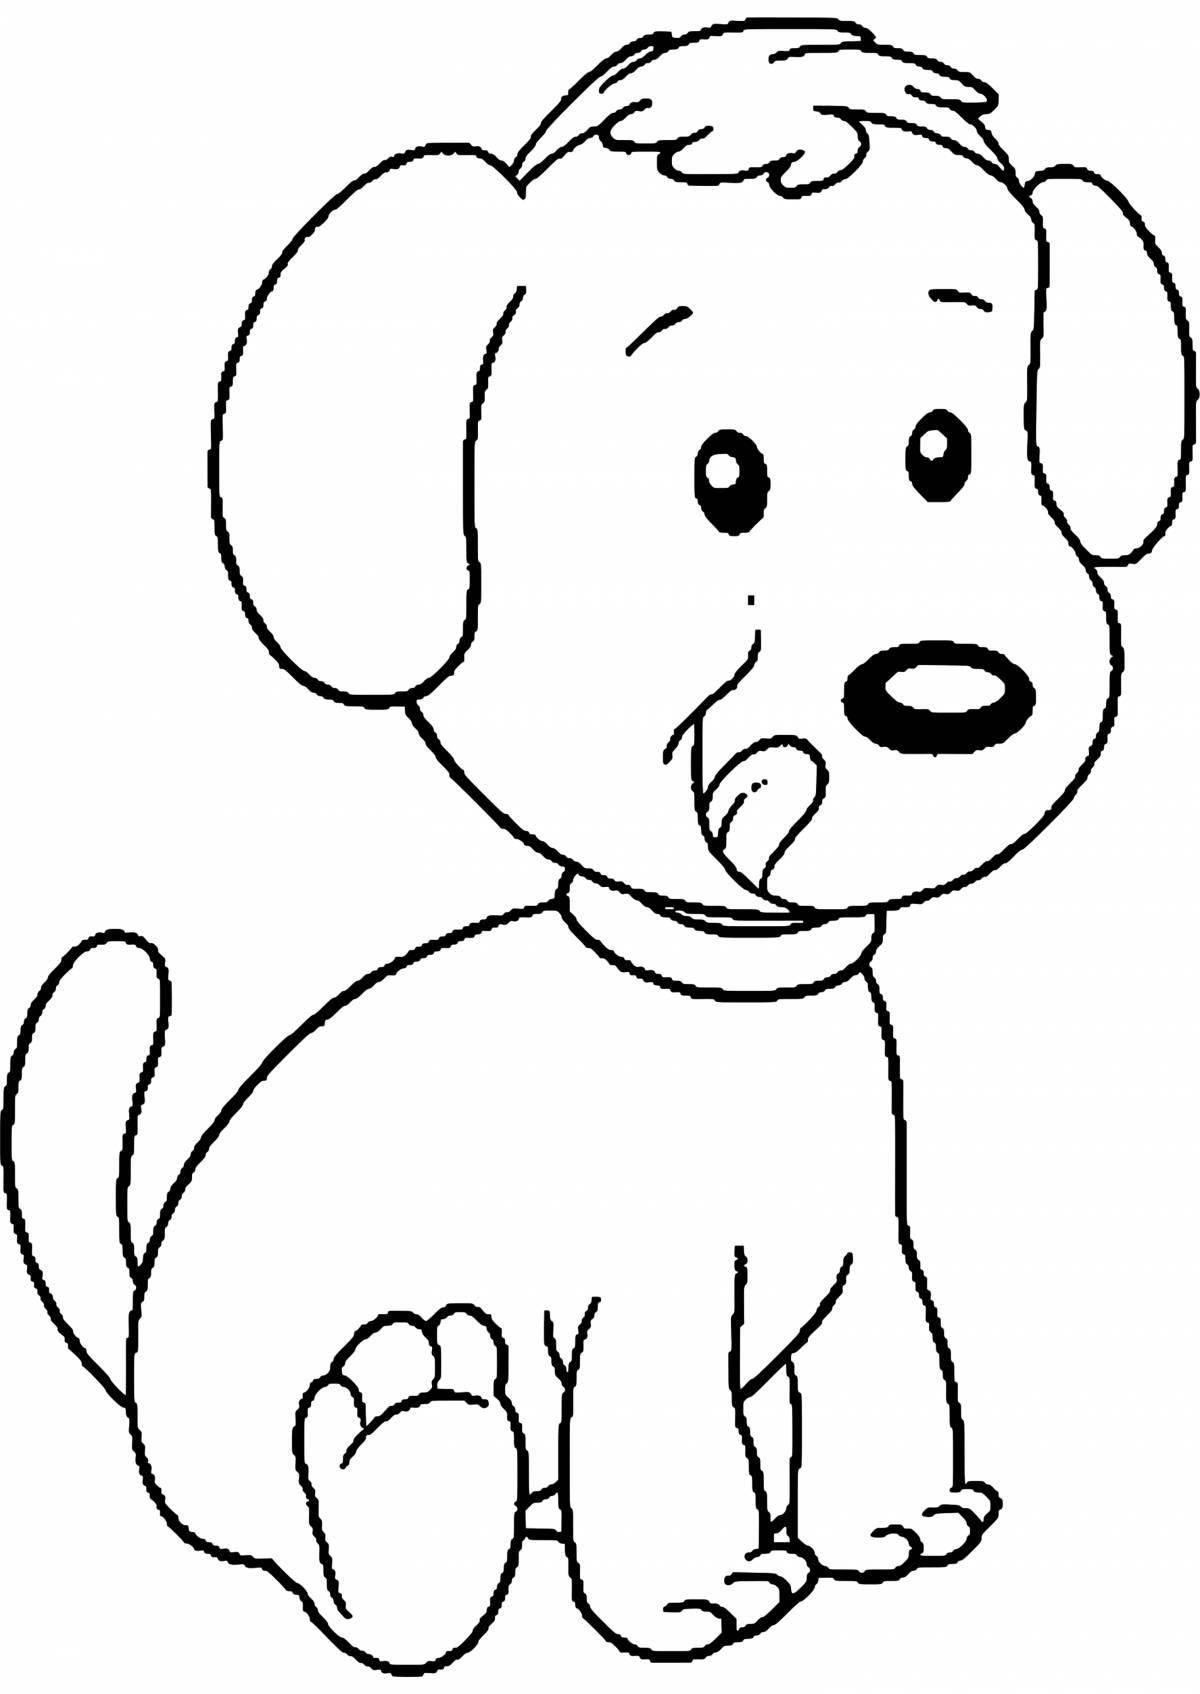 Puppy wiggly coloring page for babies